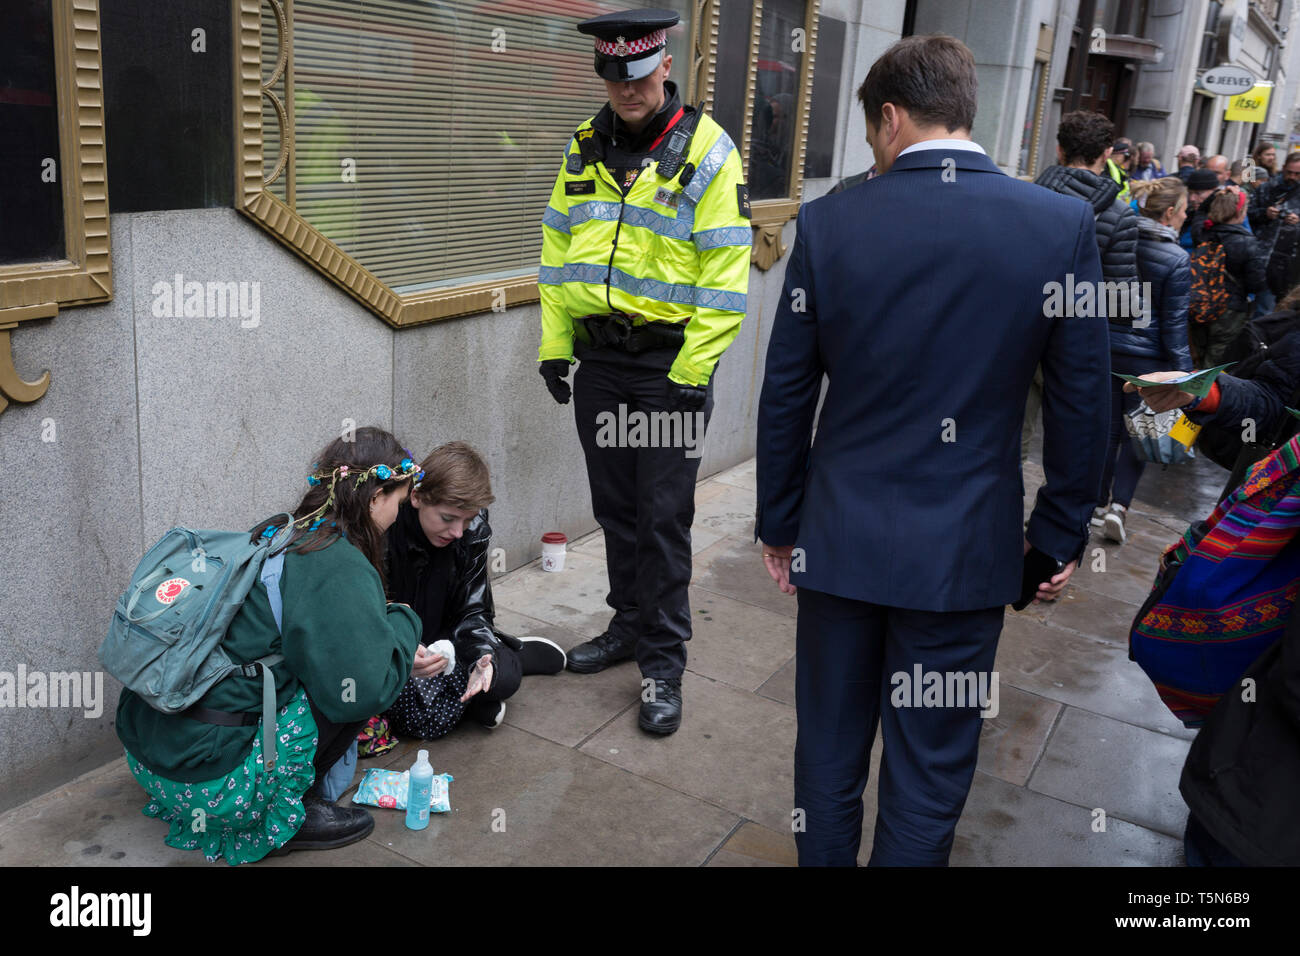 A police officer watches over an environmental protester with Superglue on her hands after glueing body parts to the road in Fleet Street on the 11th and final day of protests, road-blockages and arrests across London by the climate change campaign Extinction Rebellion, on 25th April 2019, in London, England. Stock Photo